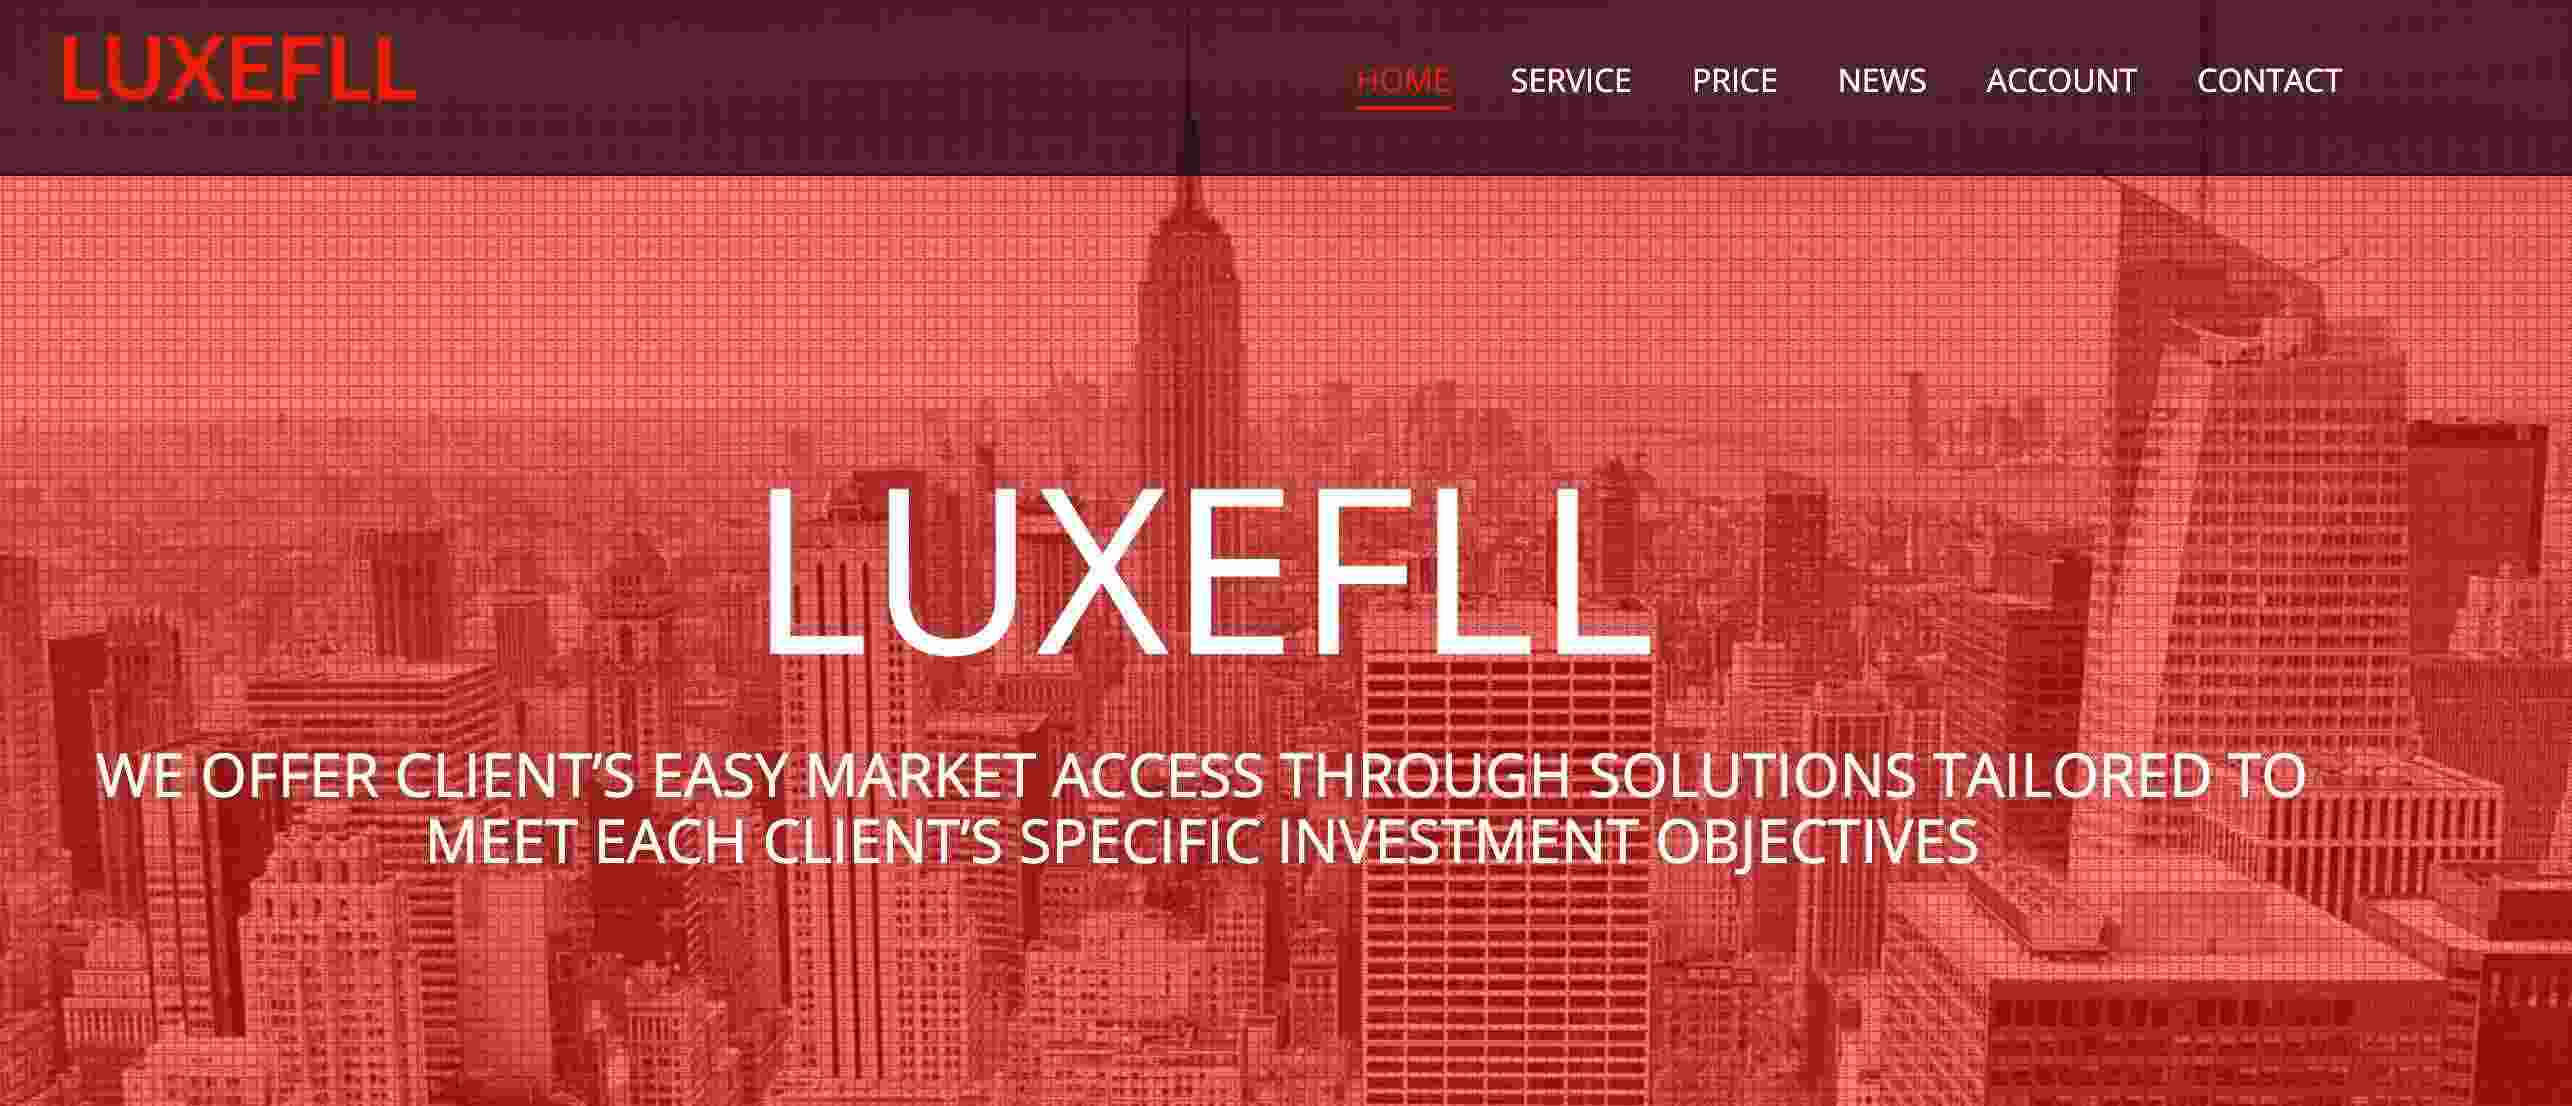 Luxefll 